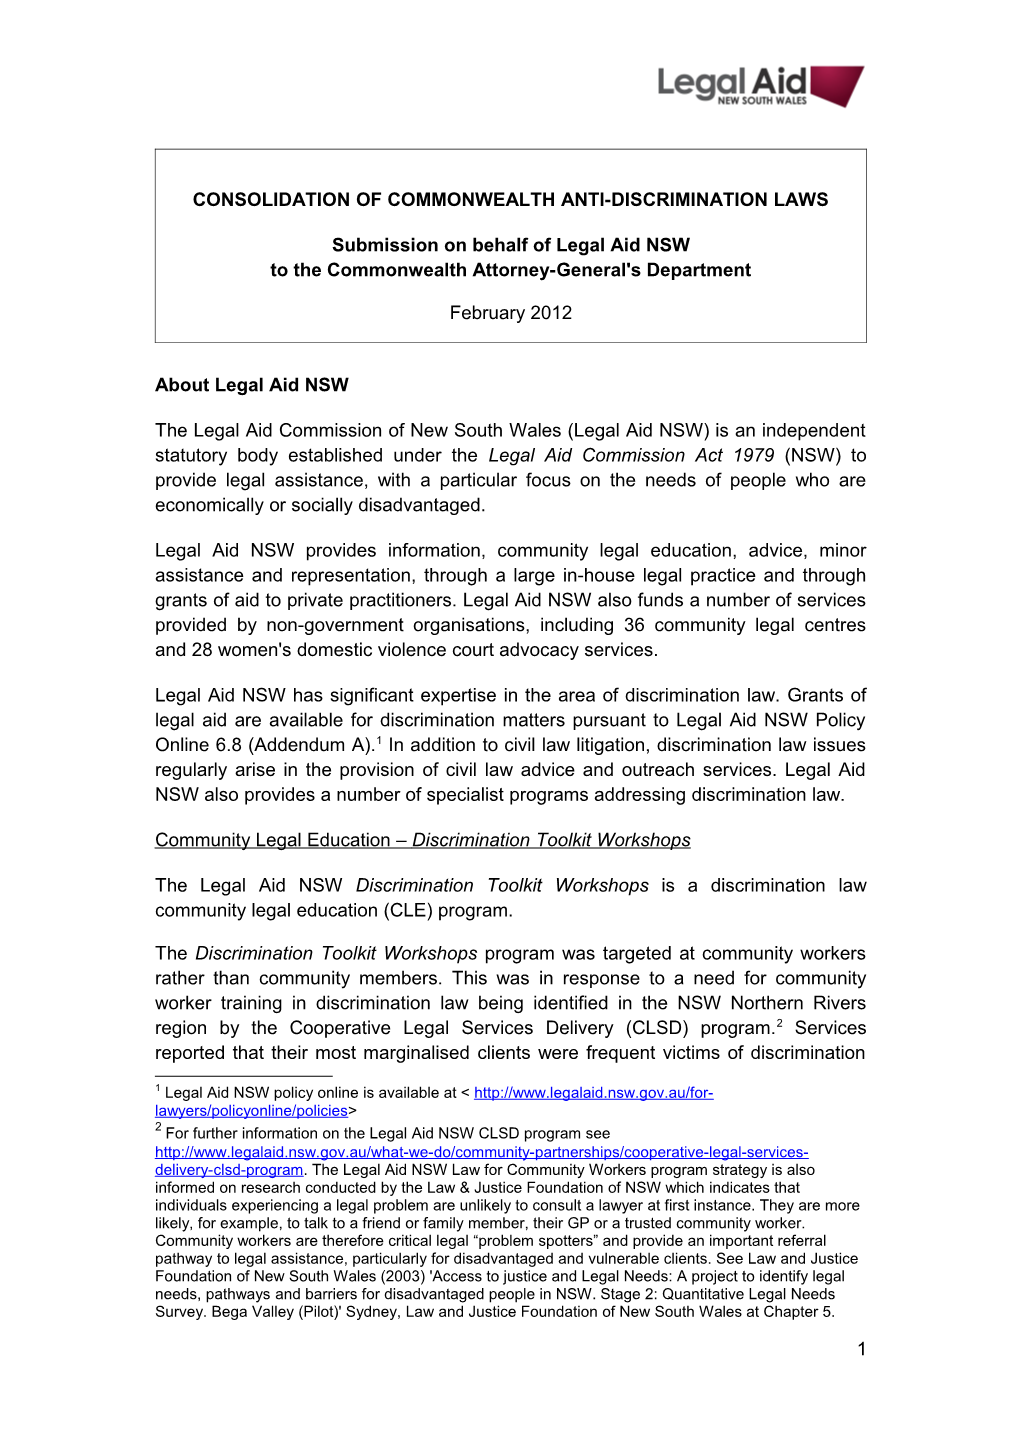 Submission on the Consolidation of Commonwealth Anti-Discrimination Laws - Legal Aid NSW